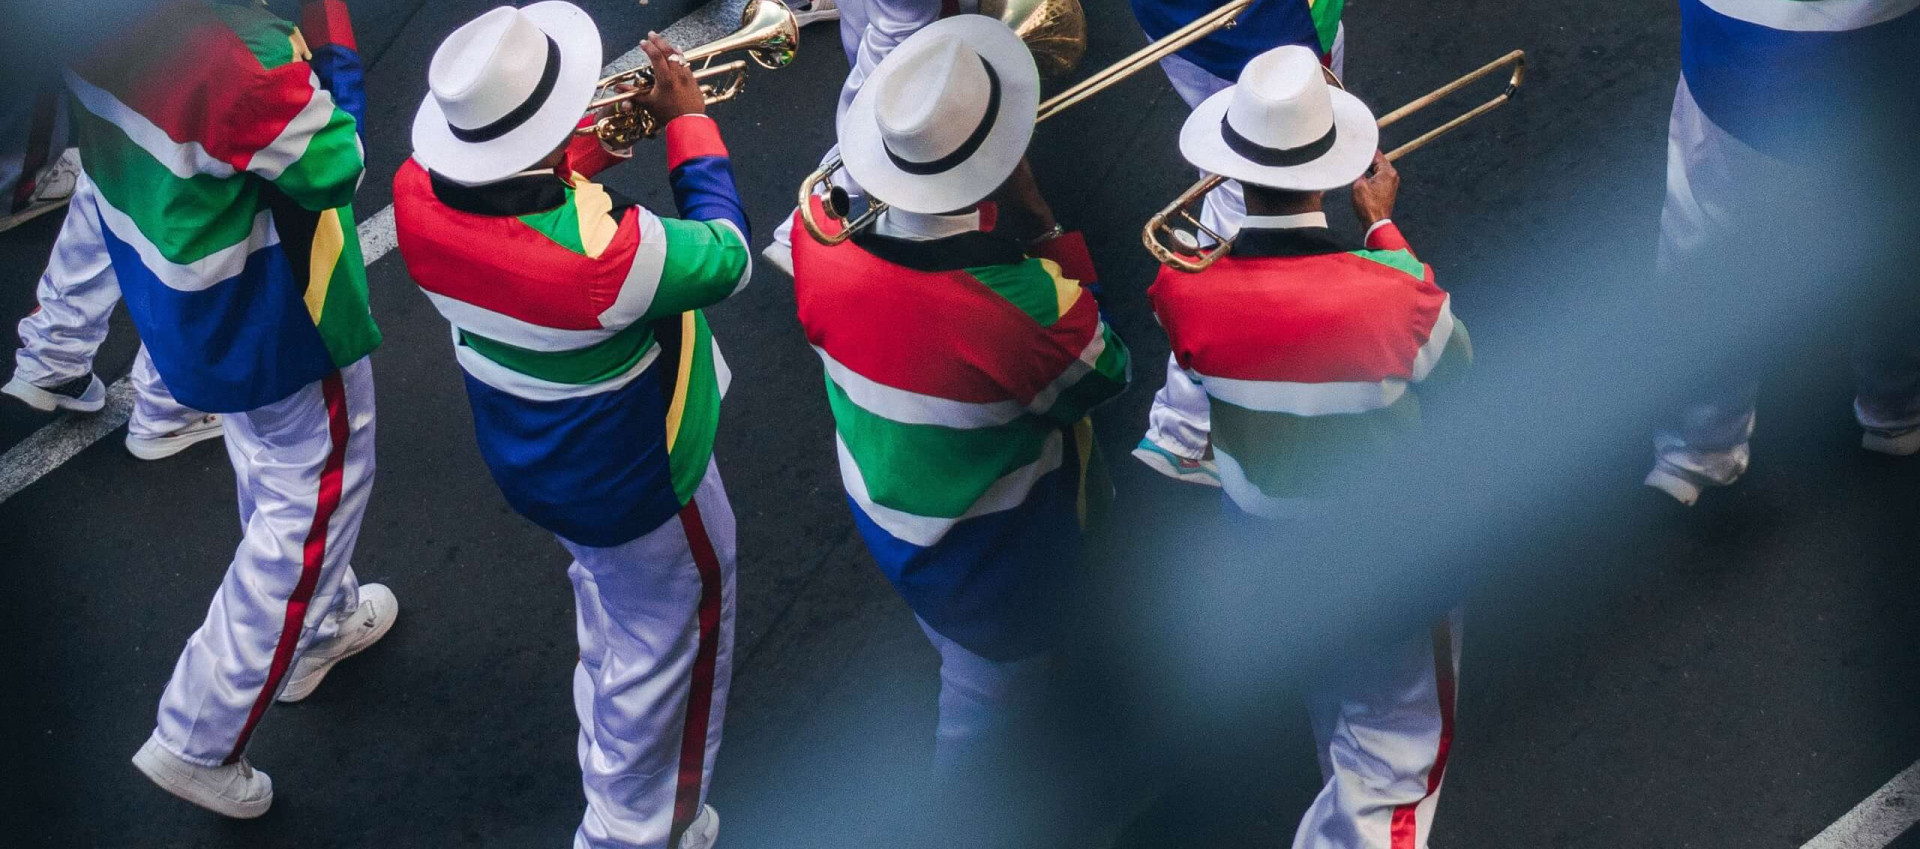 heritage day south africa UN001